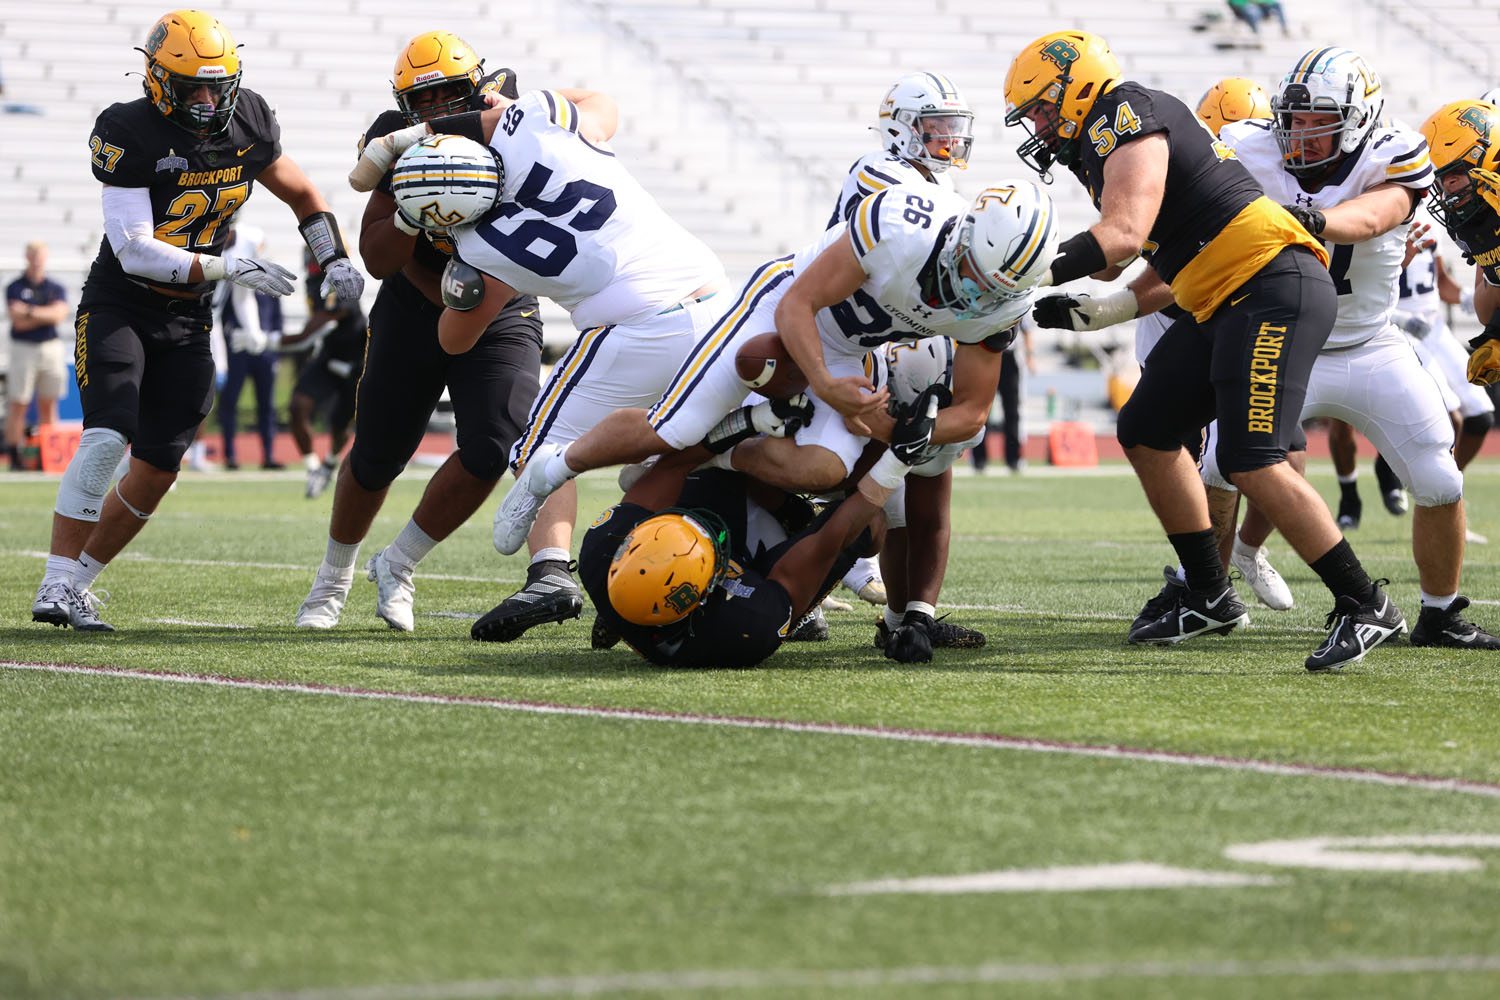 Brockport Defense causing a fumble by Lycoming